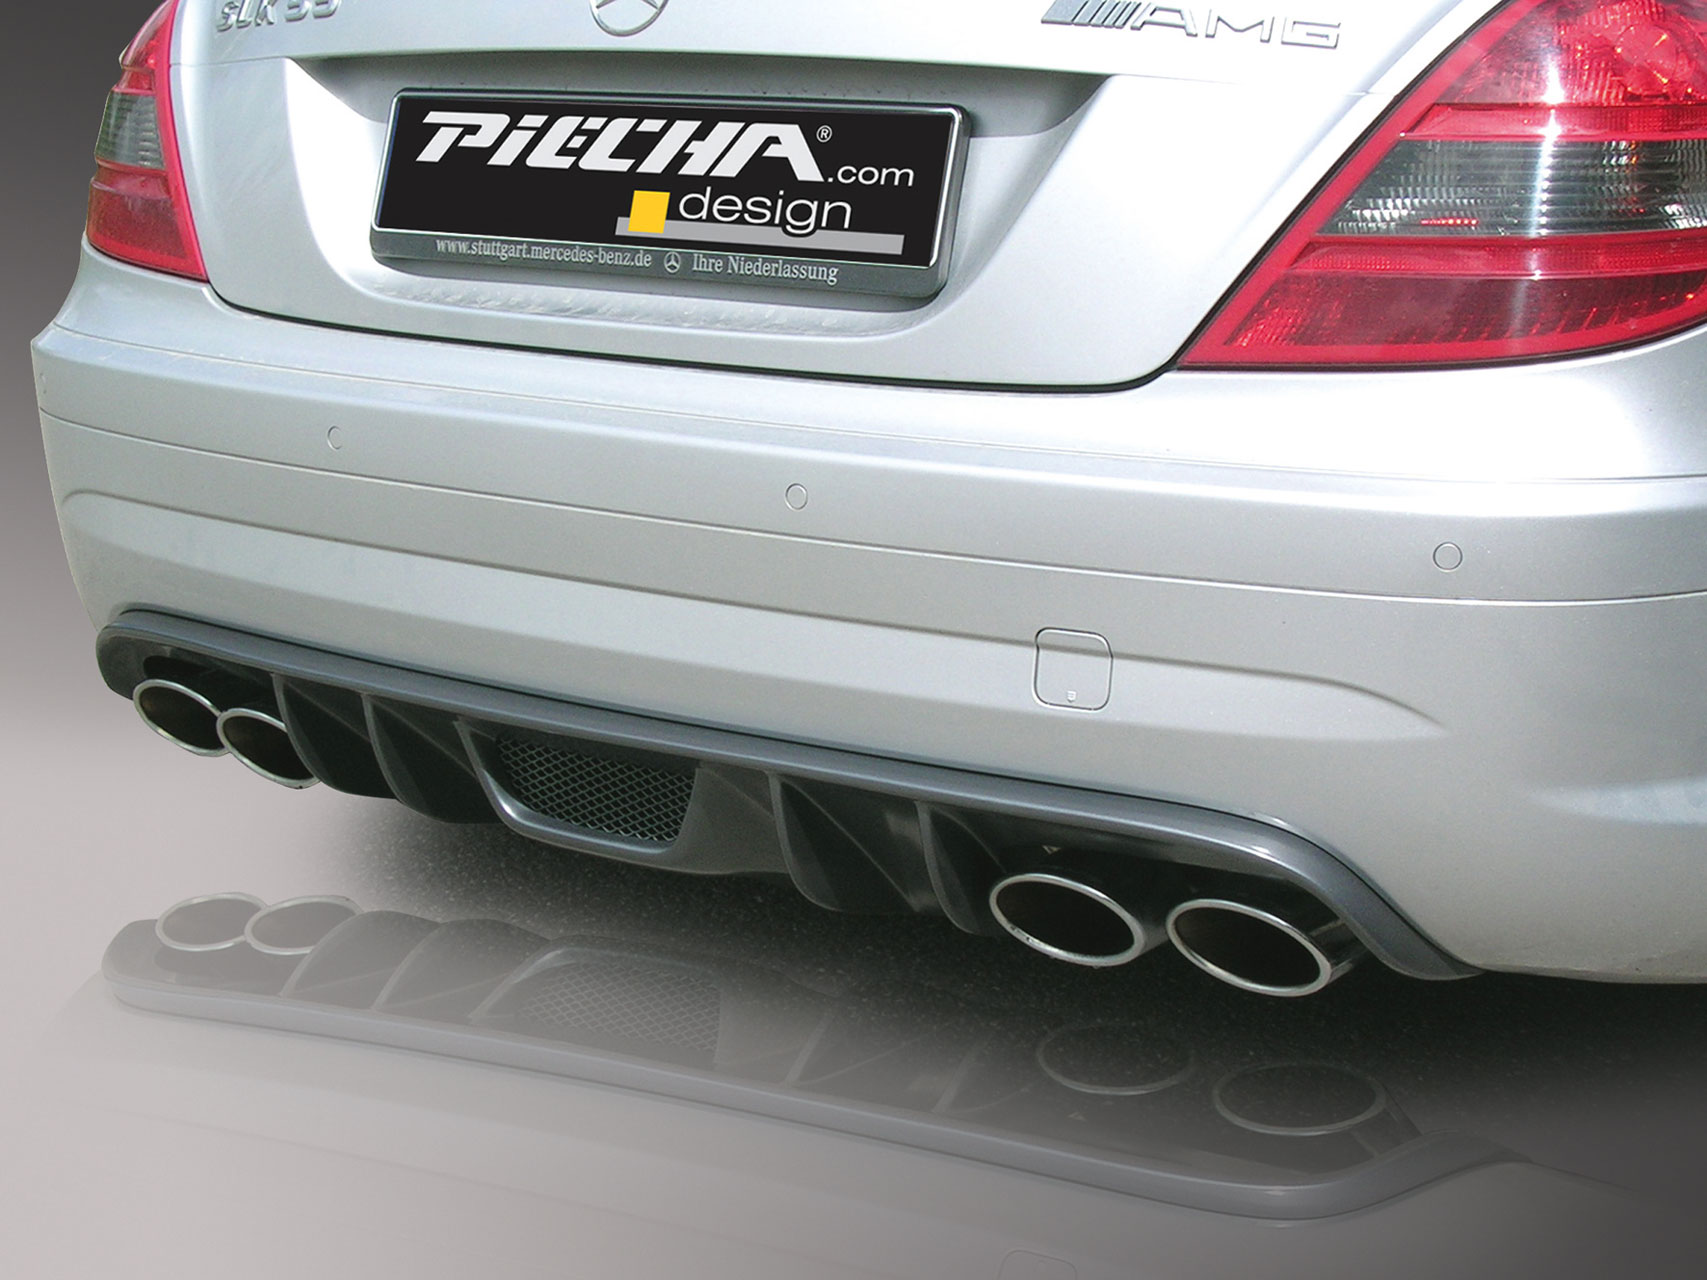 PIECHA Race rear diffusor, 4-pipe version for AMG line, AMG 55